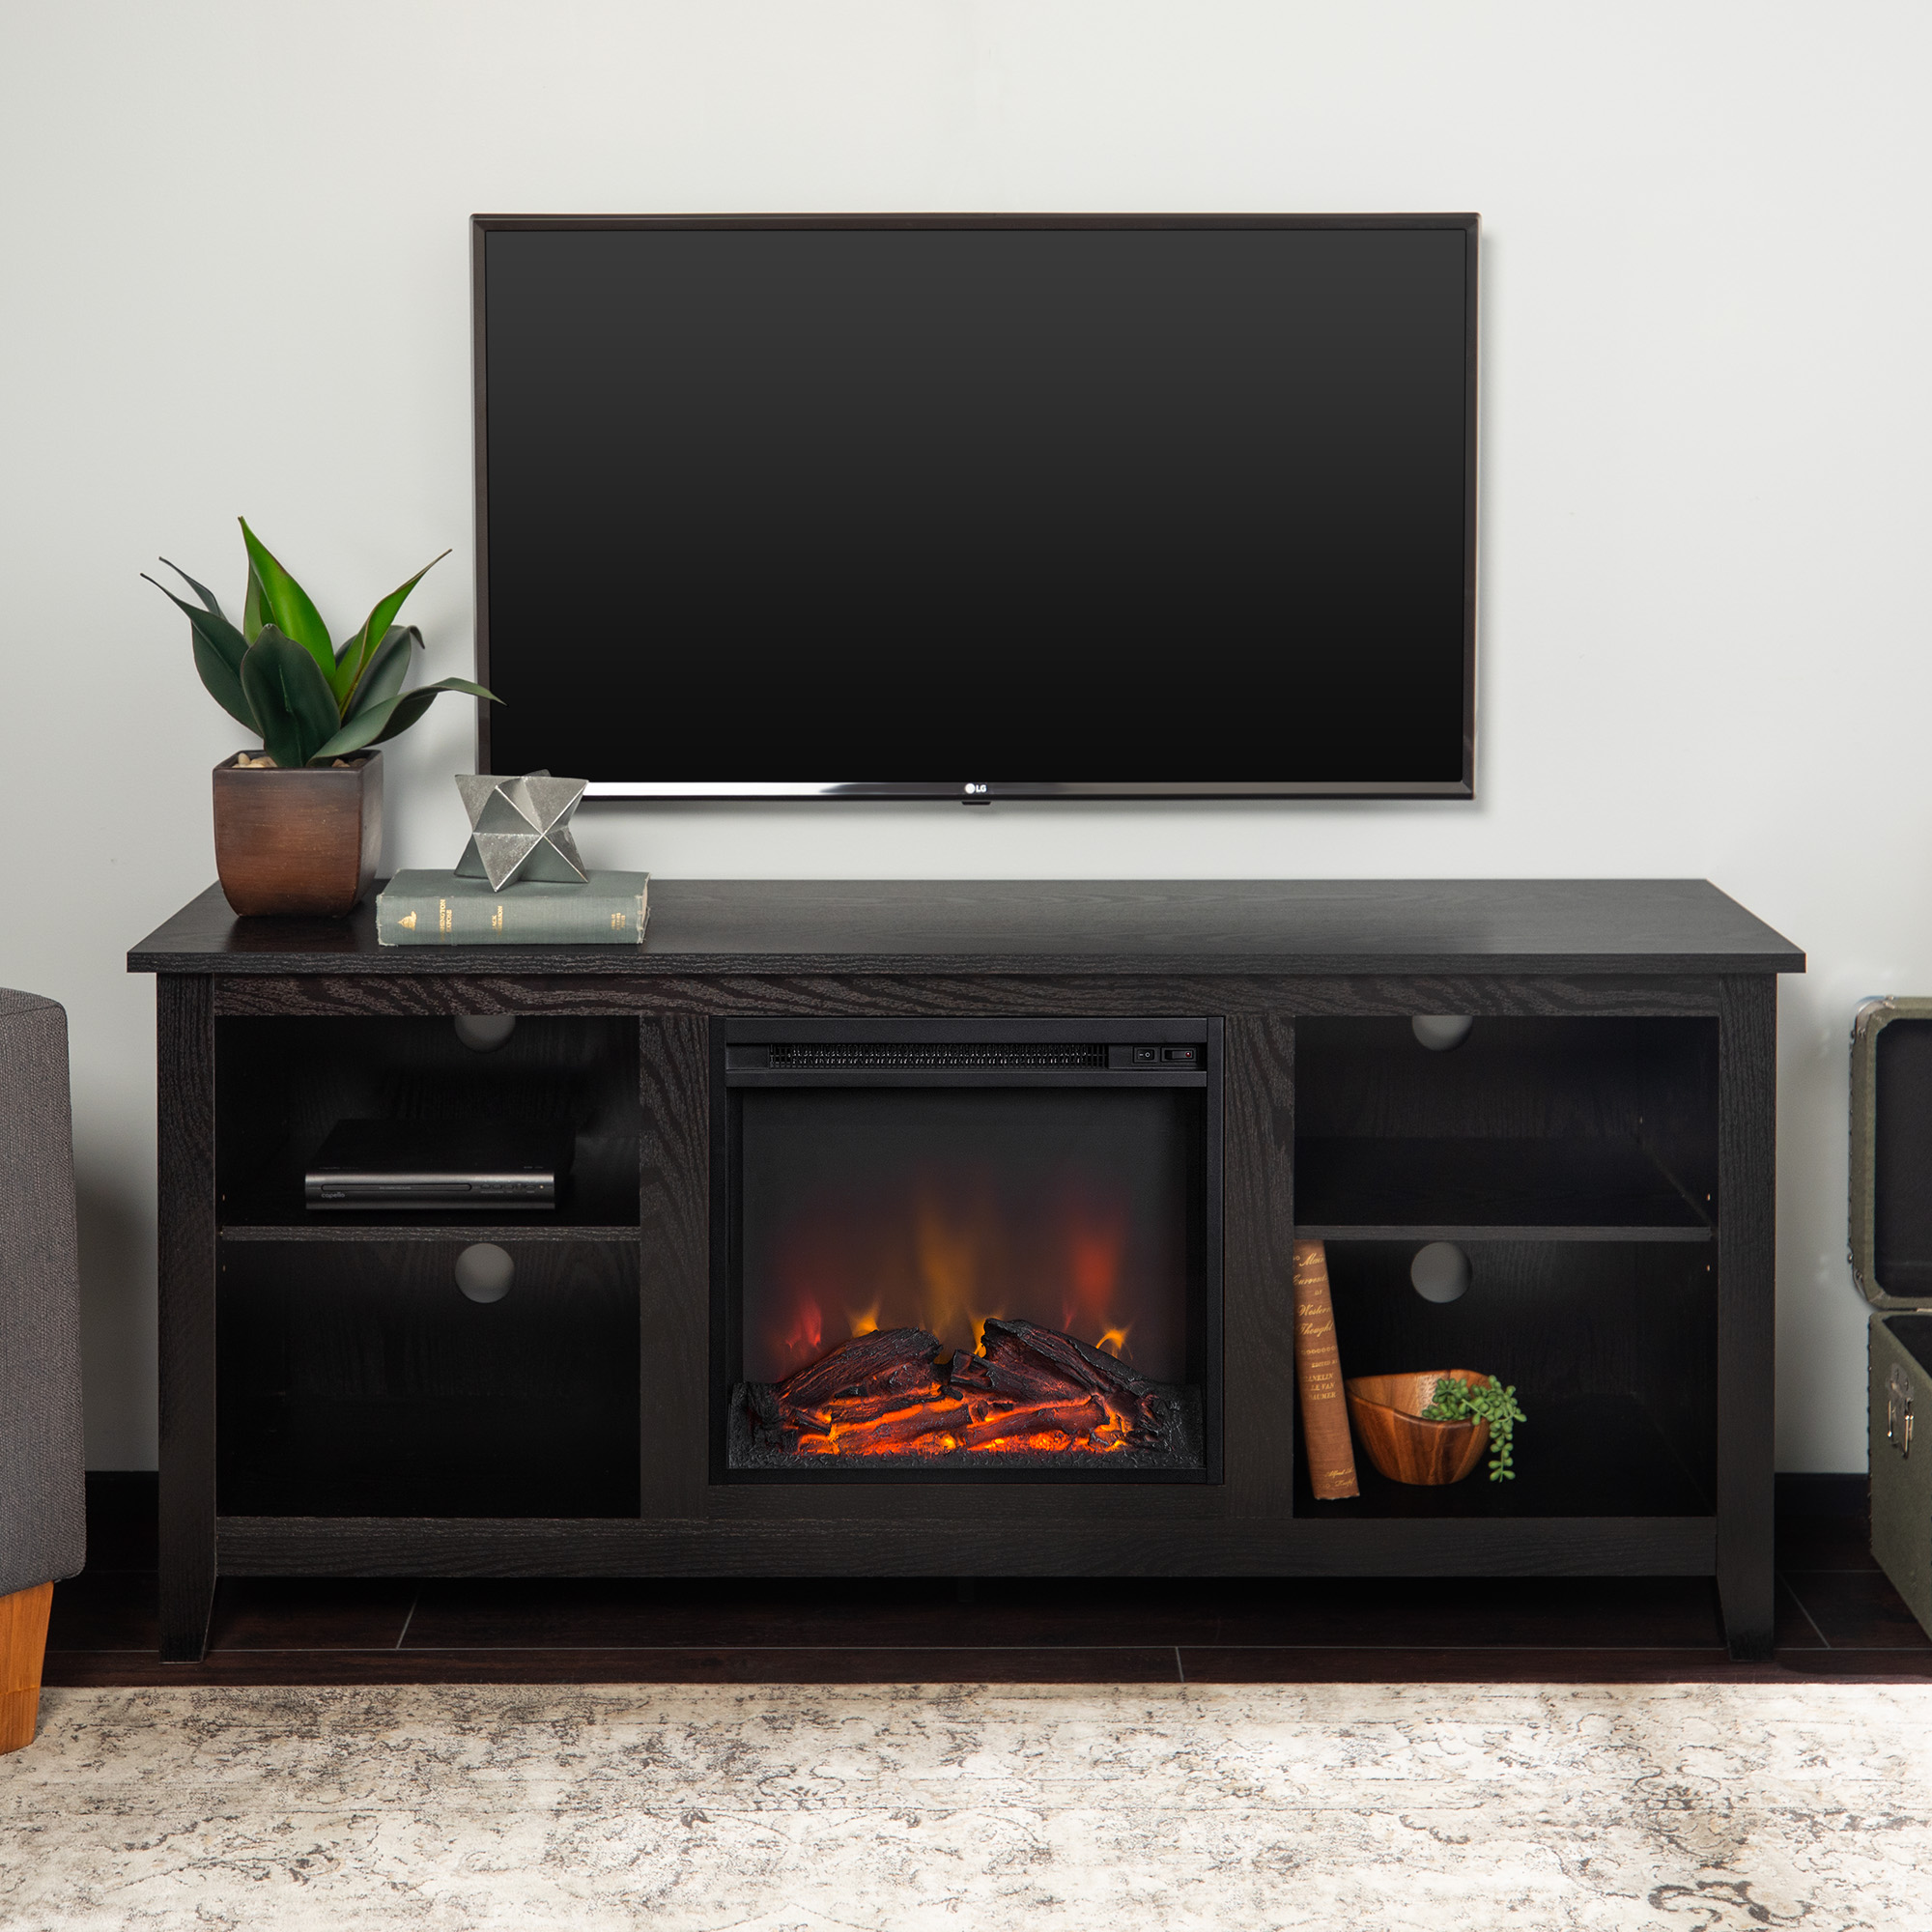 Walker Edison Traditional Fireplace TV Stand for TVs Up to 64" - Black - image 2 of 9